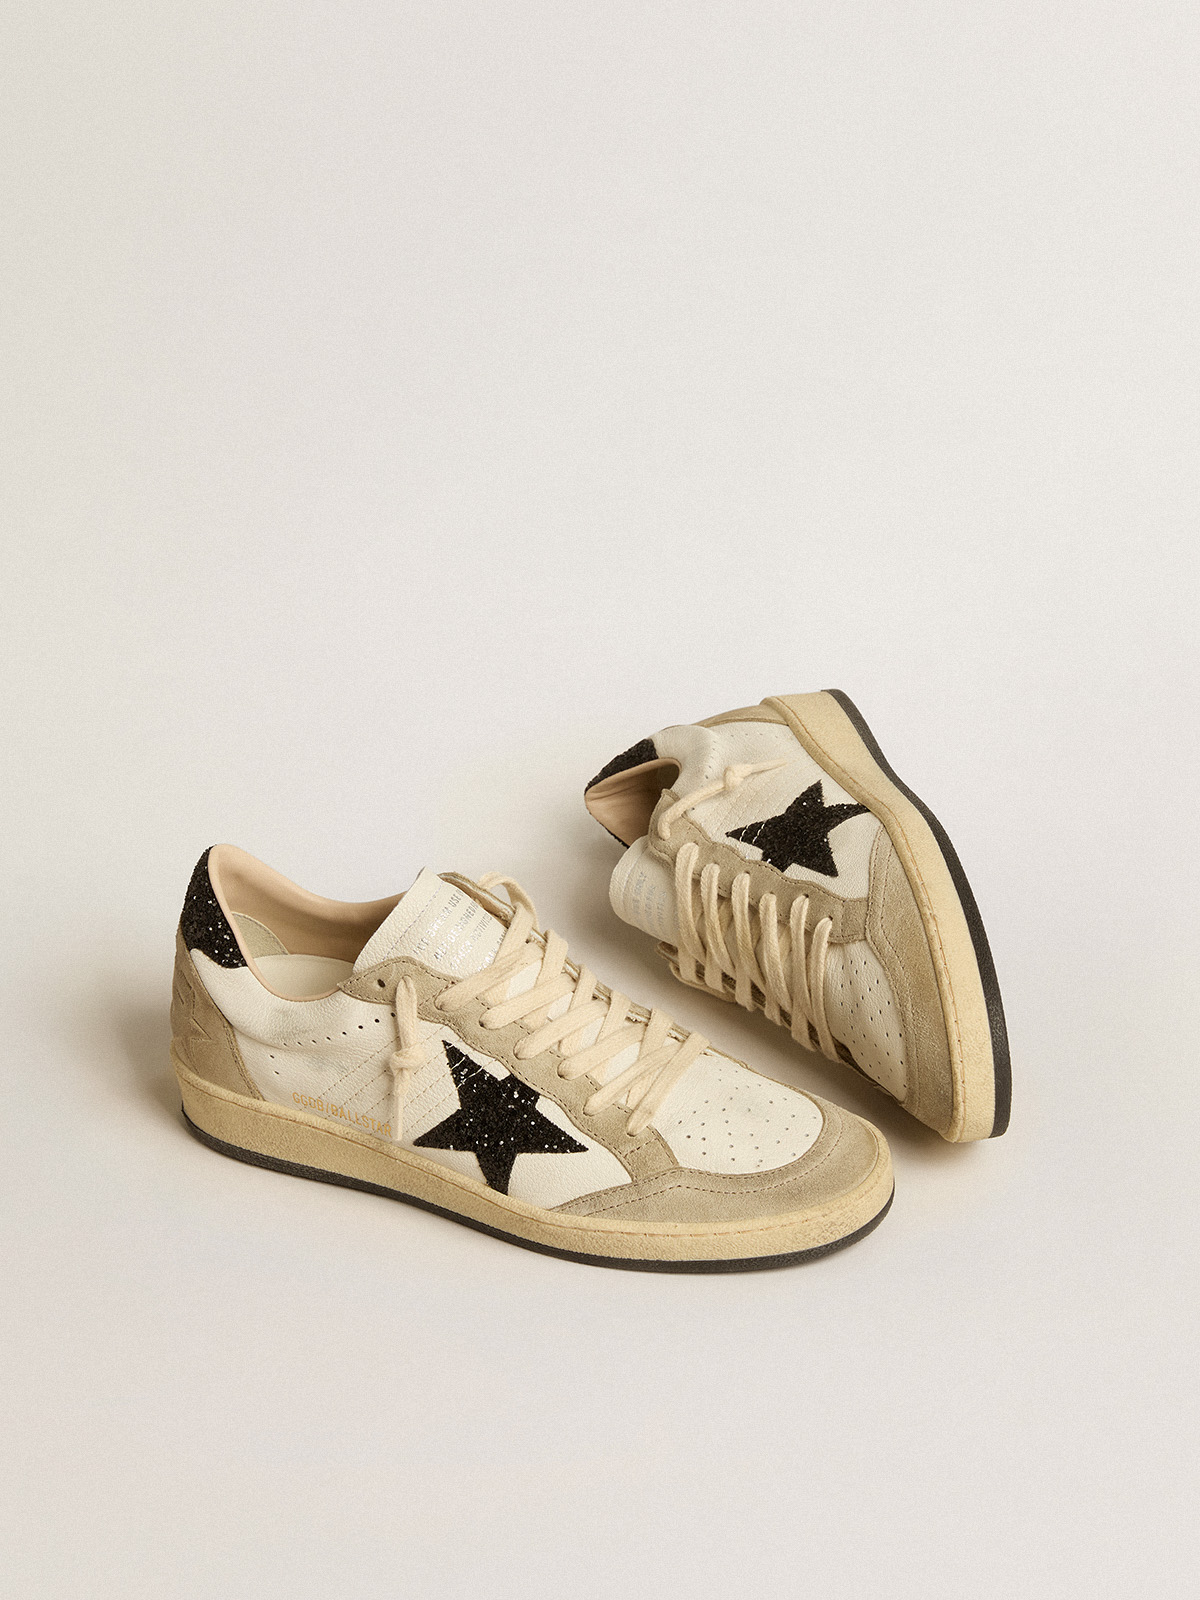 Ball Star in nappa and suede with black glitter star and heel tab